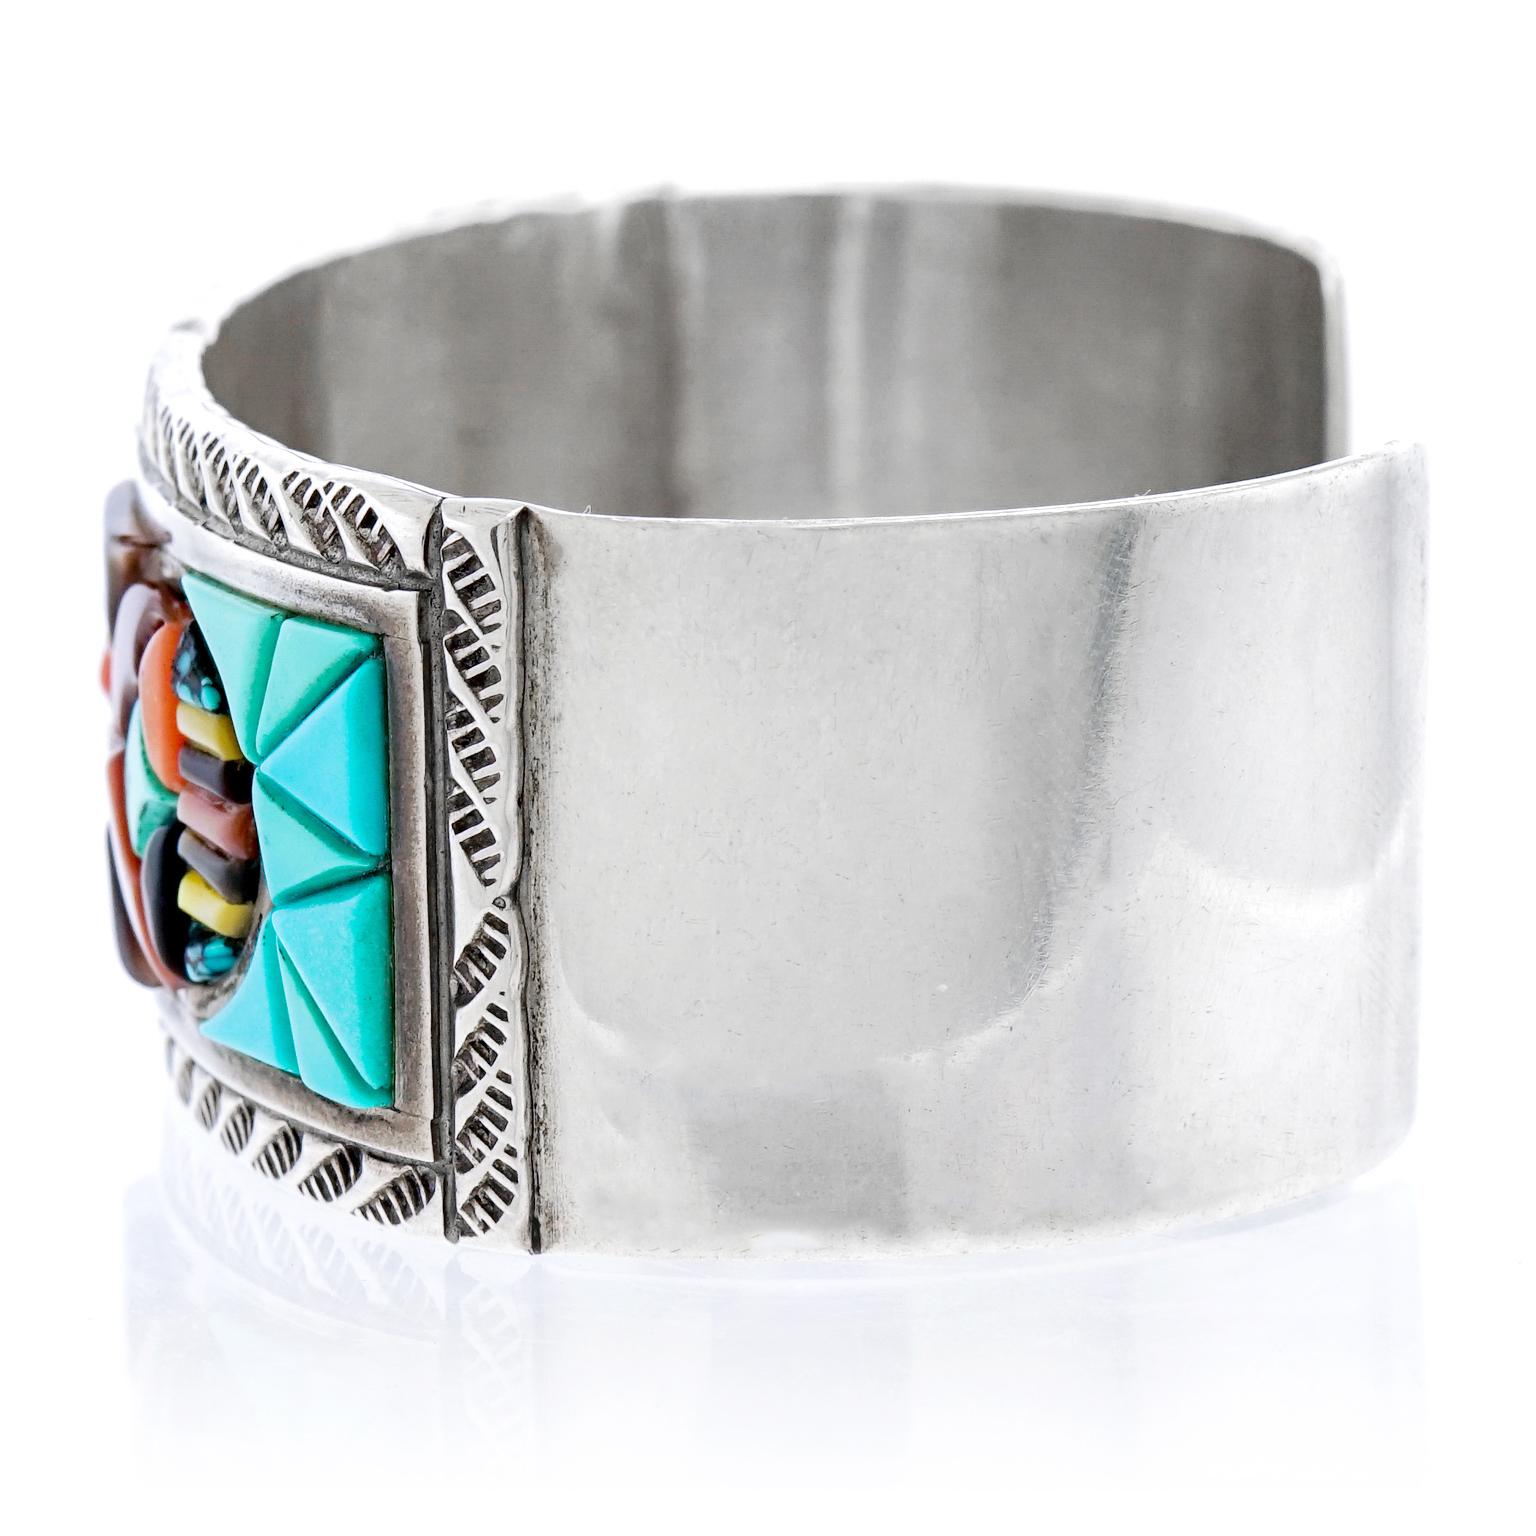 Women's or Men's Zuni Stone Inlay Sterling Cuff Bracelet by Valentino and Matilda Banteah